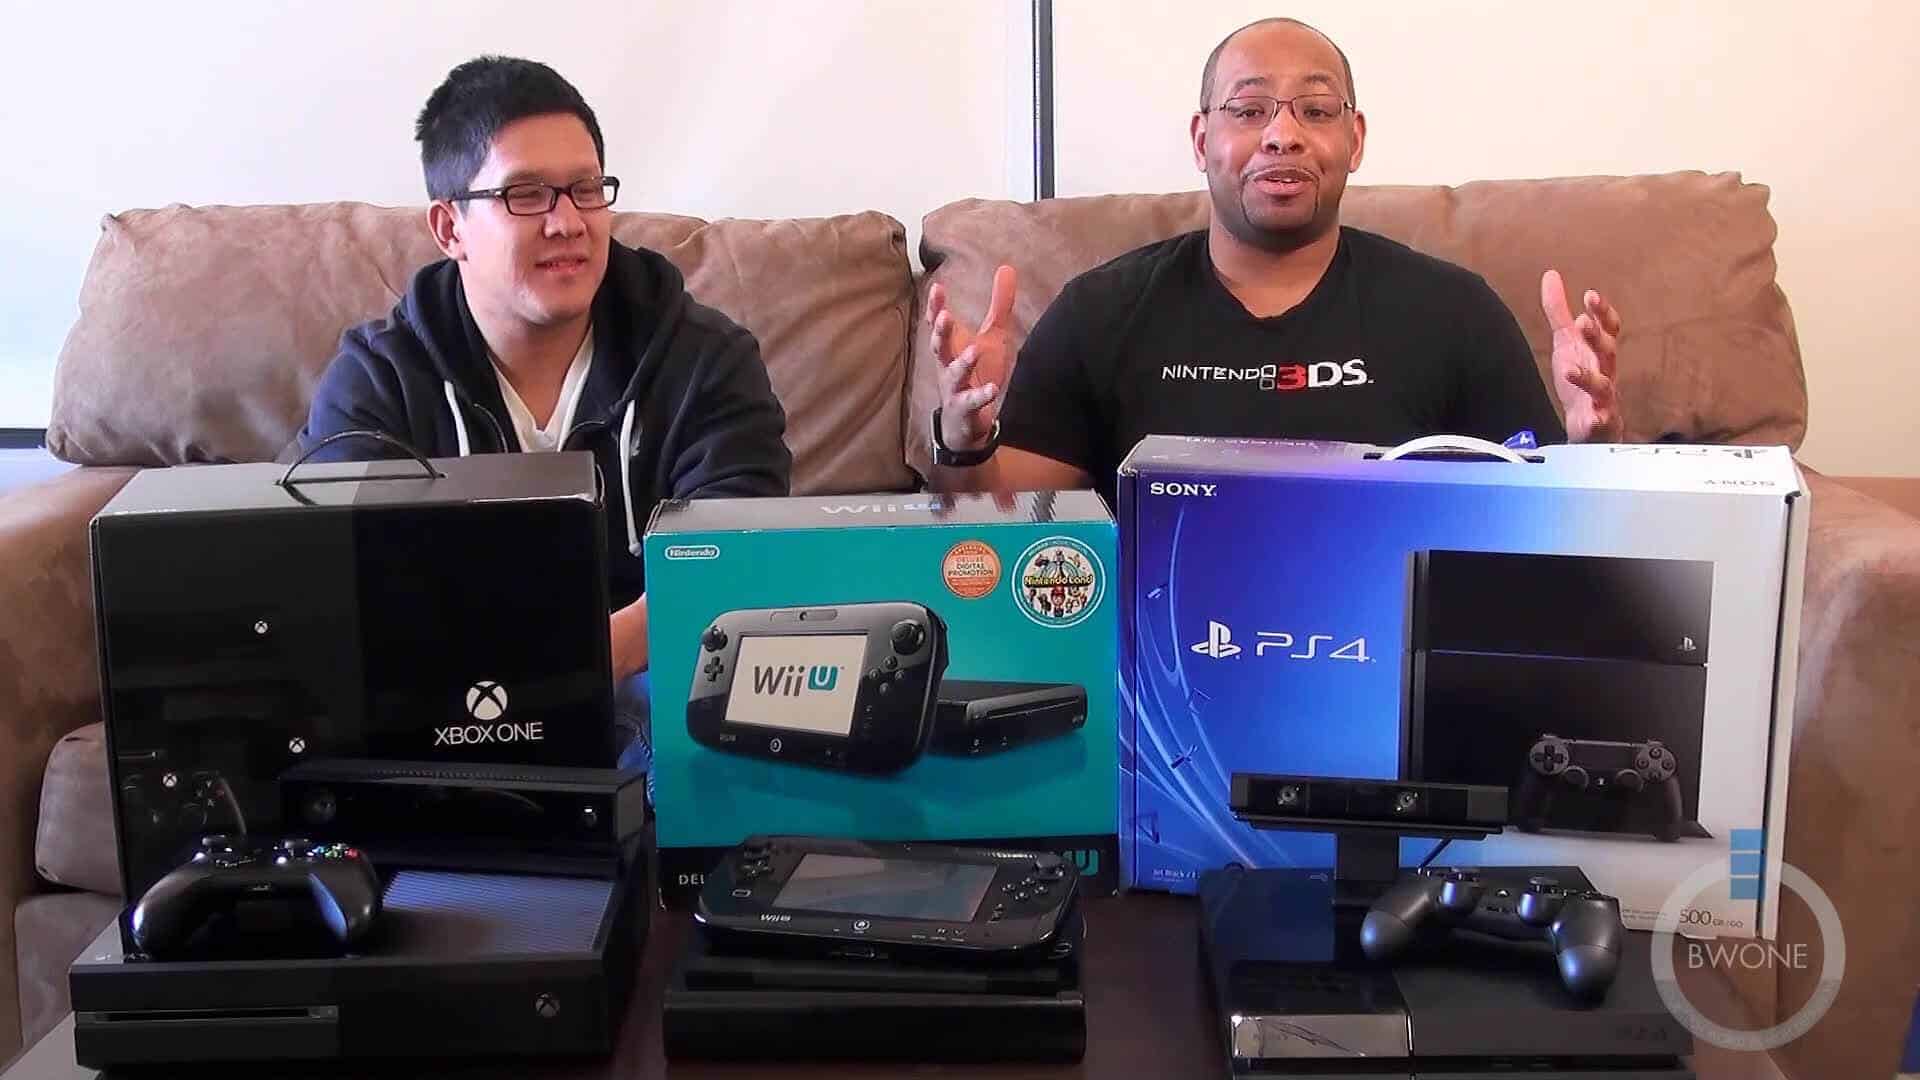 Ps4 Vs Xbox One Vs Wii U Review